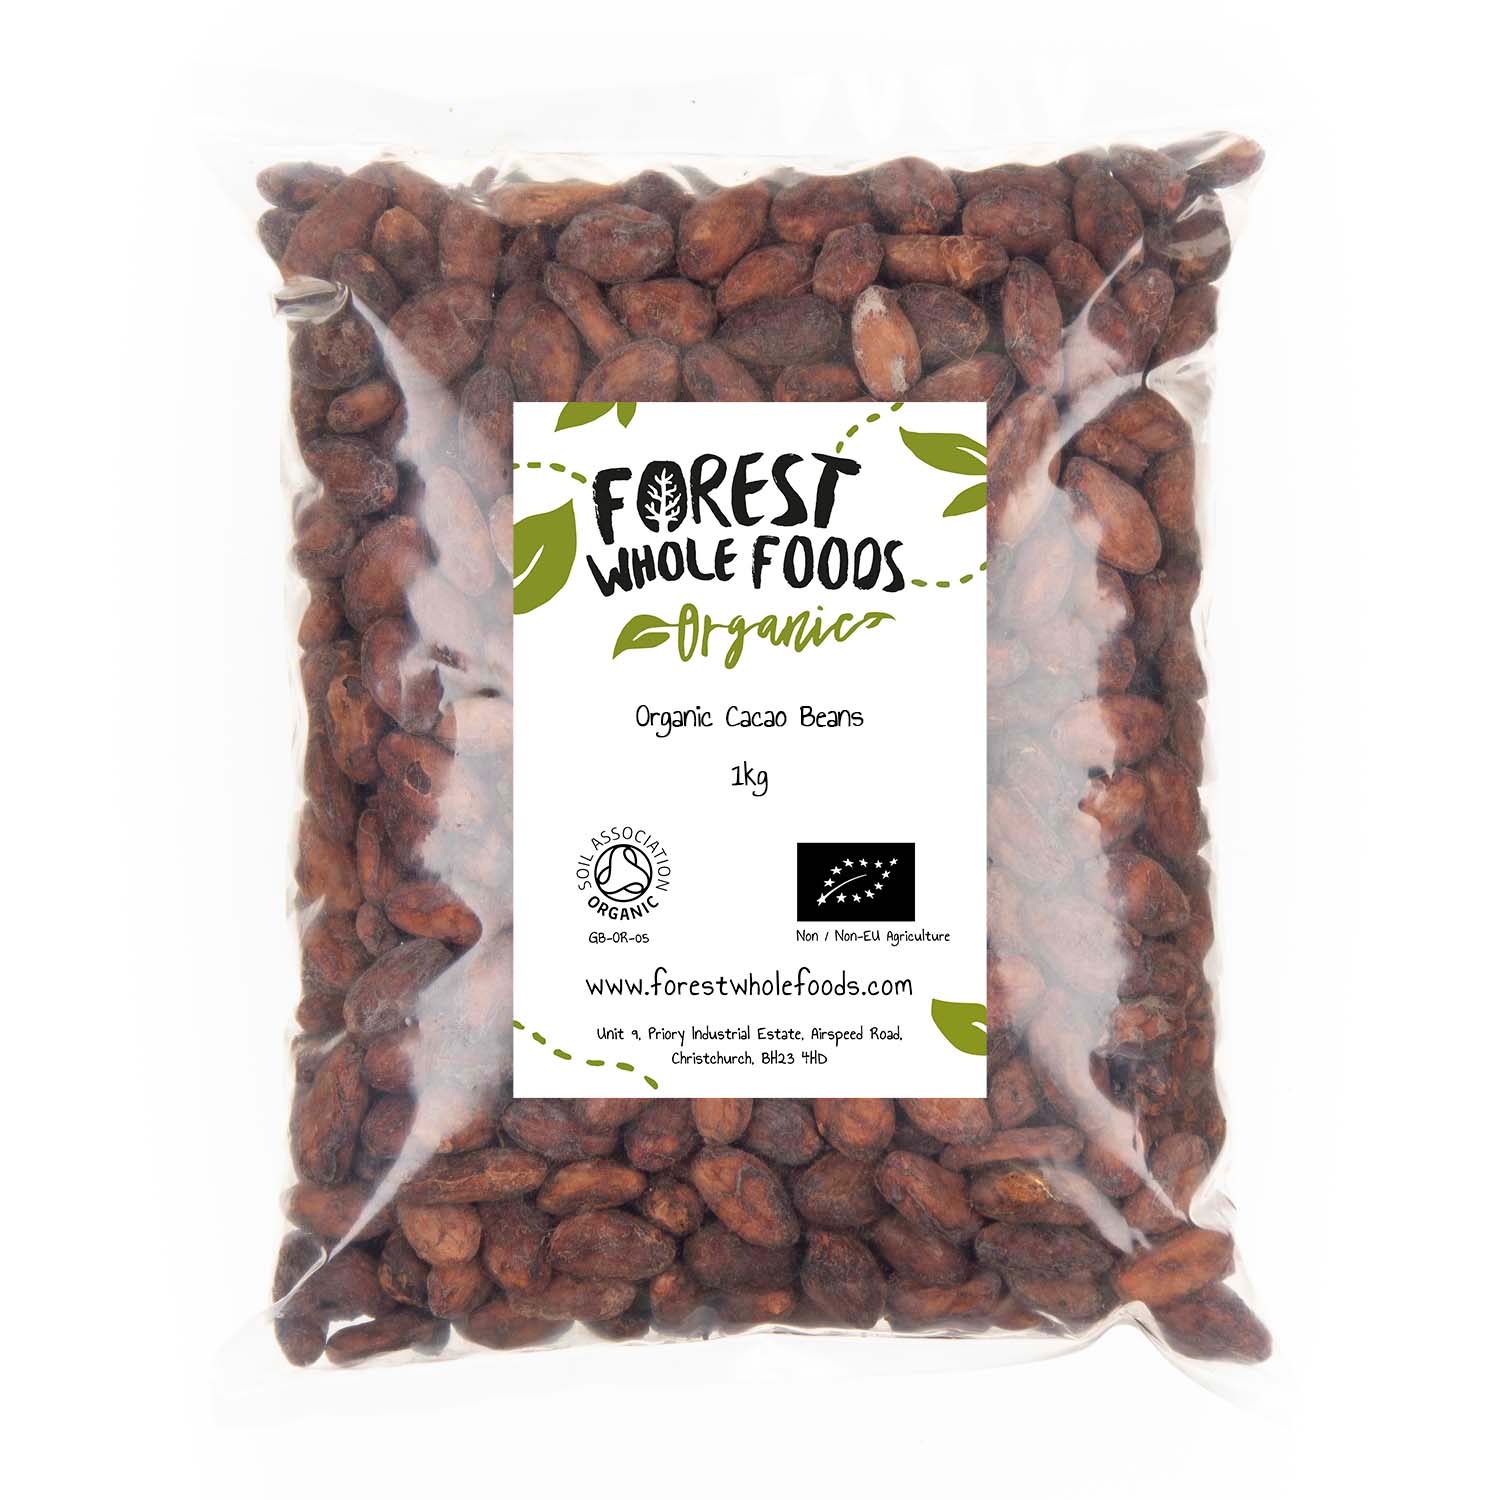 Organic Cacao Beans 1kg